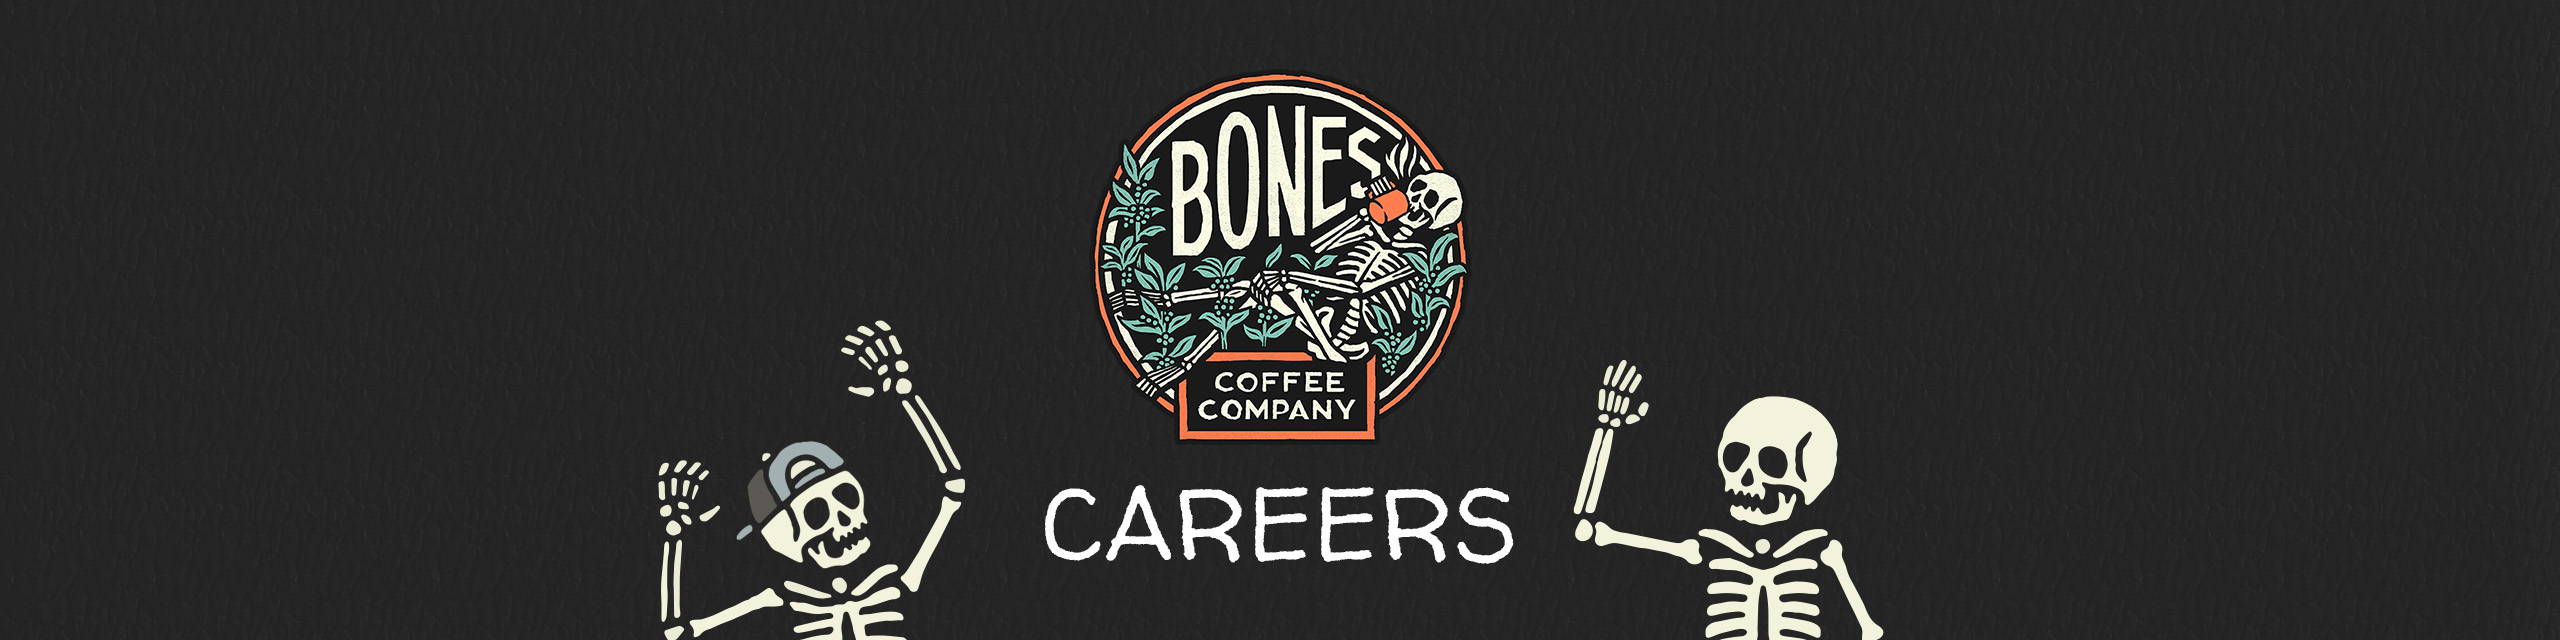 The Bones Coffee Company logo with the word careers beneath it. Two skeletons are nearby, one waving, and one with its arms up in a cheer with a cap on its head.